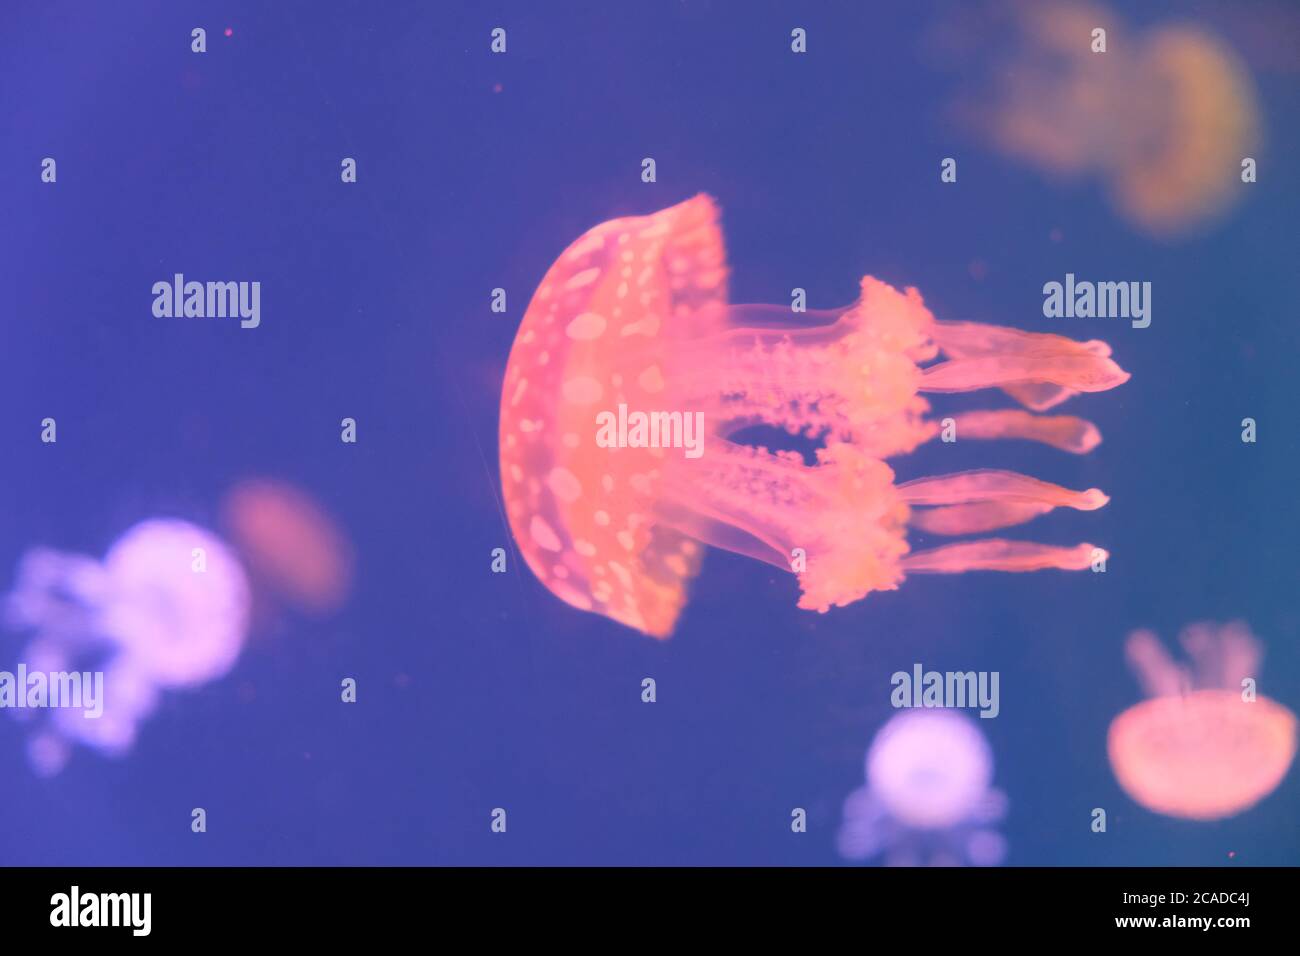 close up one fluorescent pink jellyfish swimming in water. Blur background Stock Photo